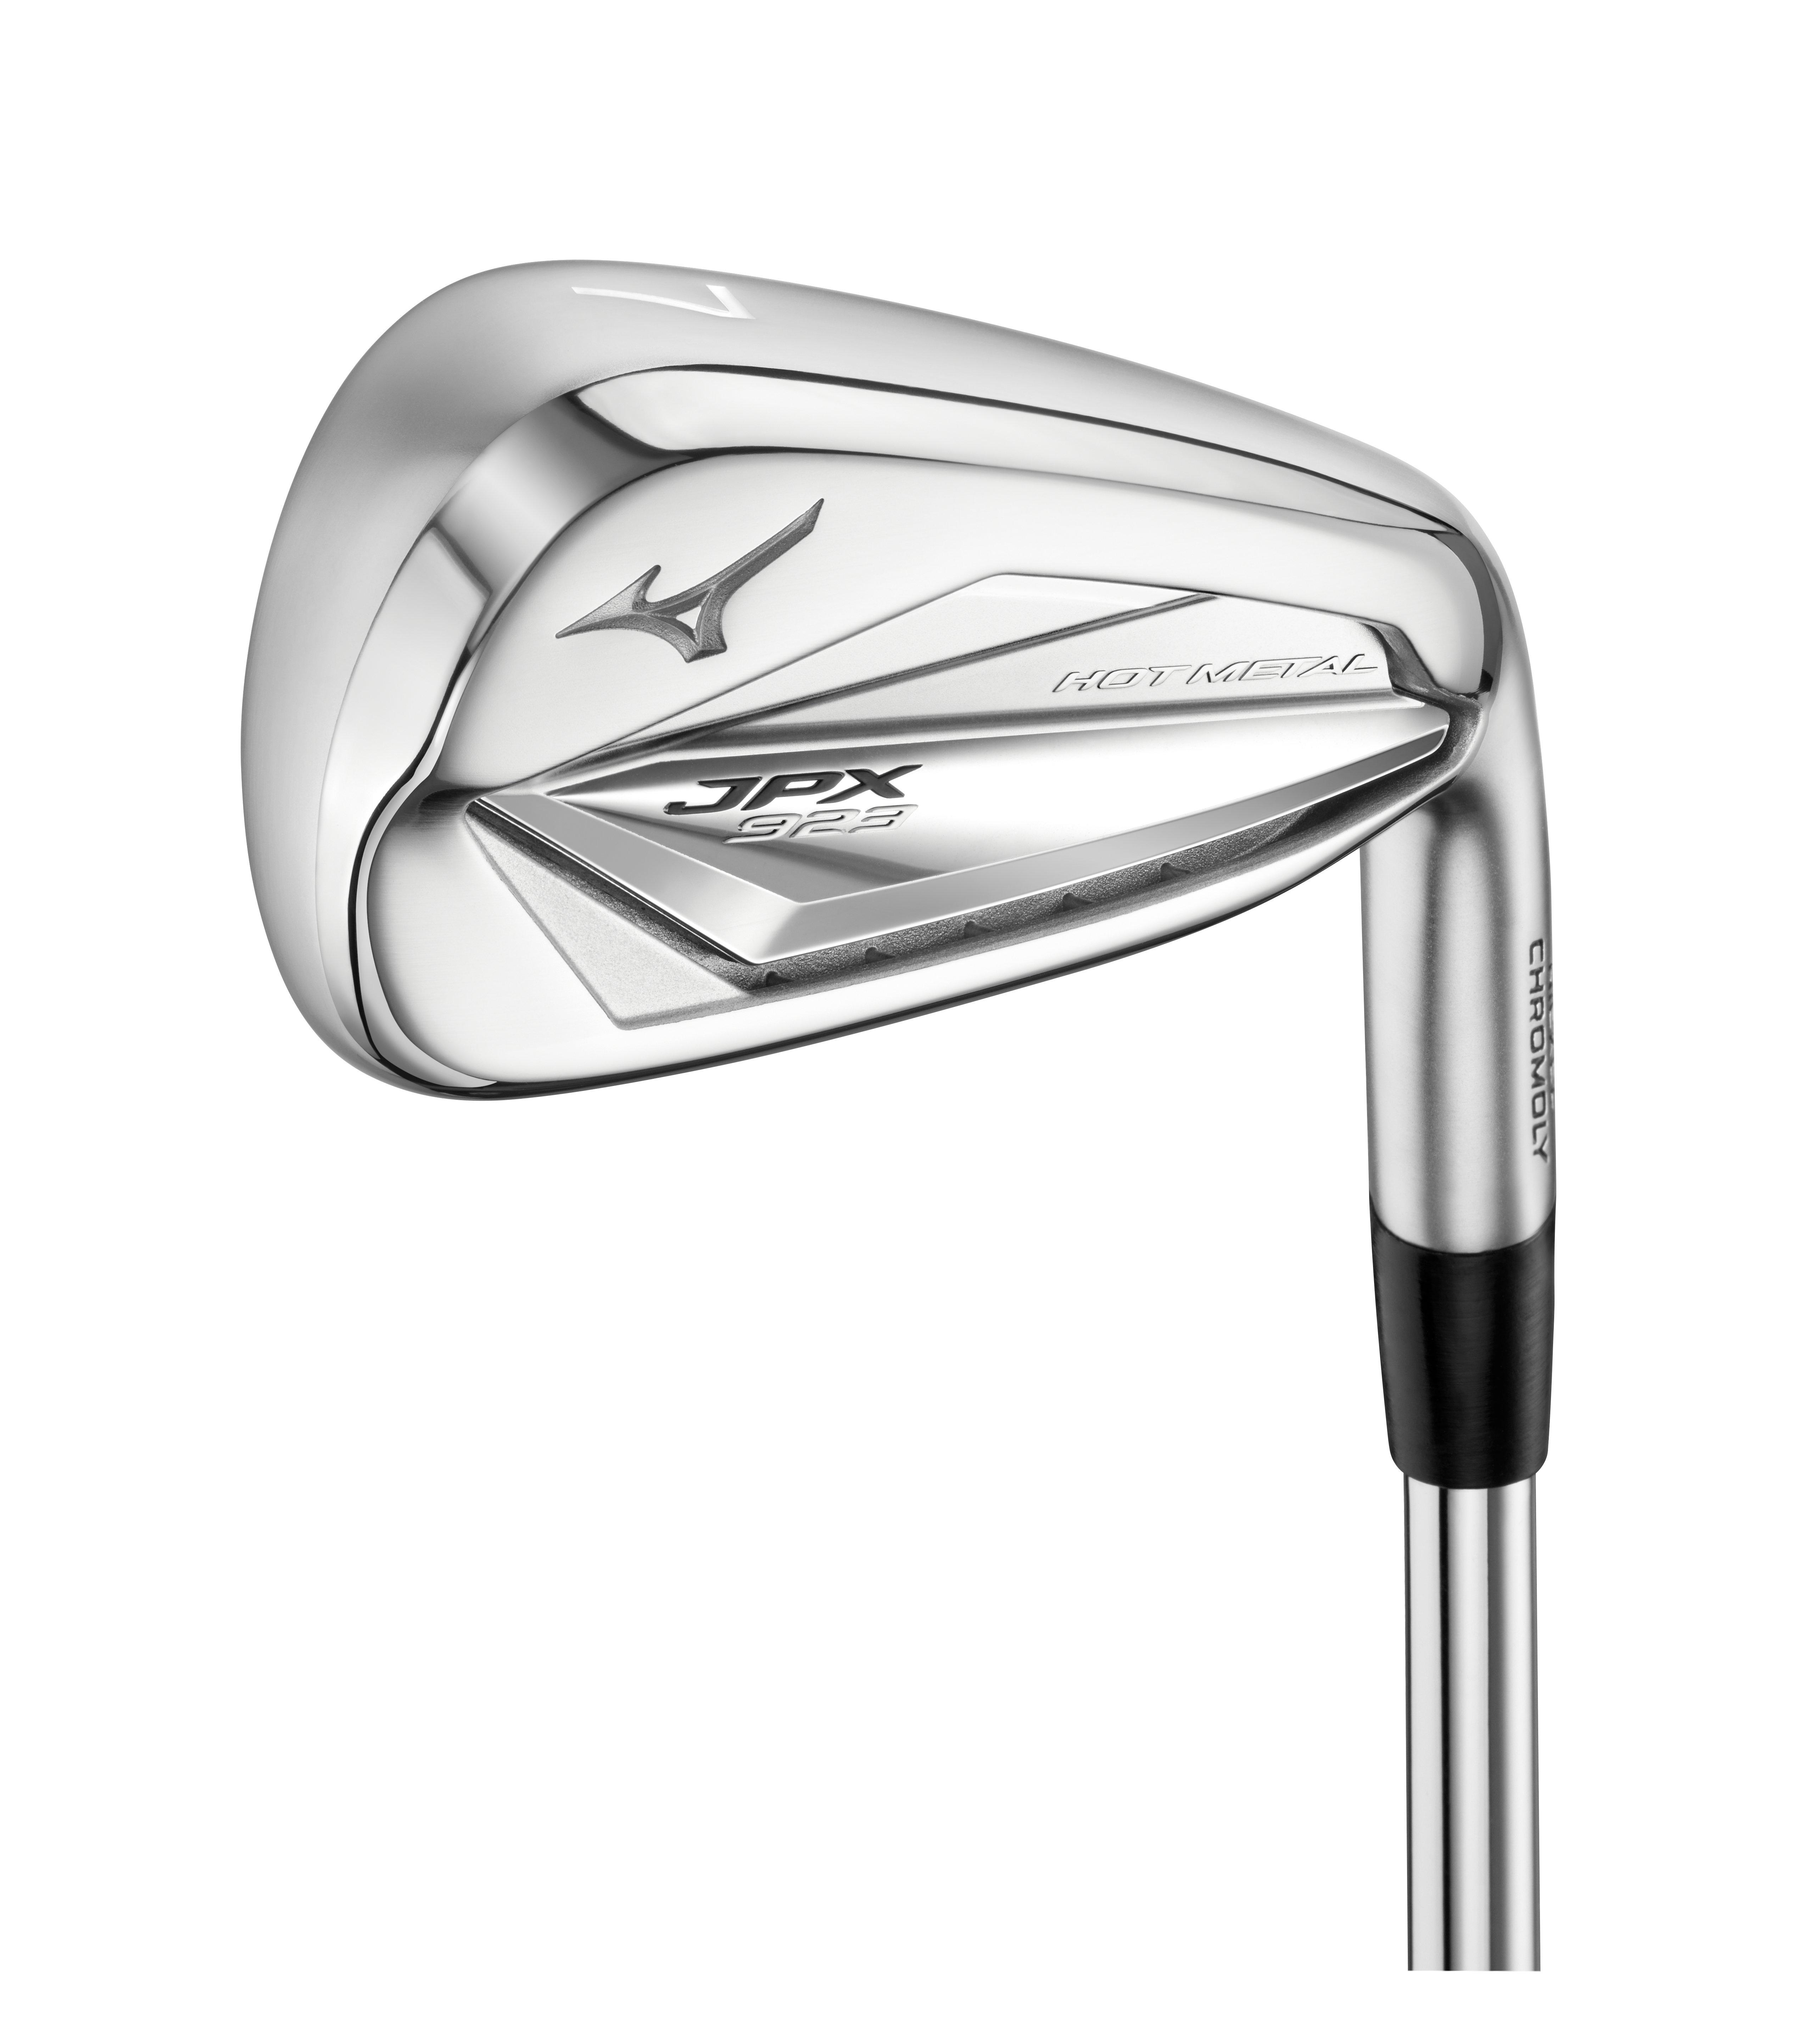 JPX923 Hot Metal 5-PW GW Iron Set with Steel Shafts